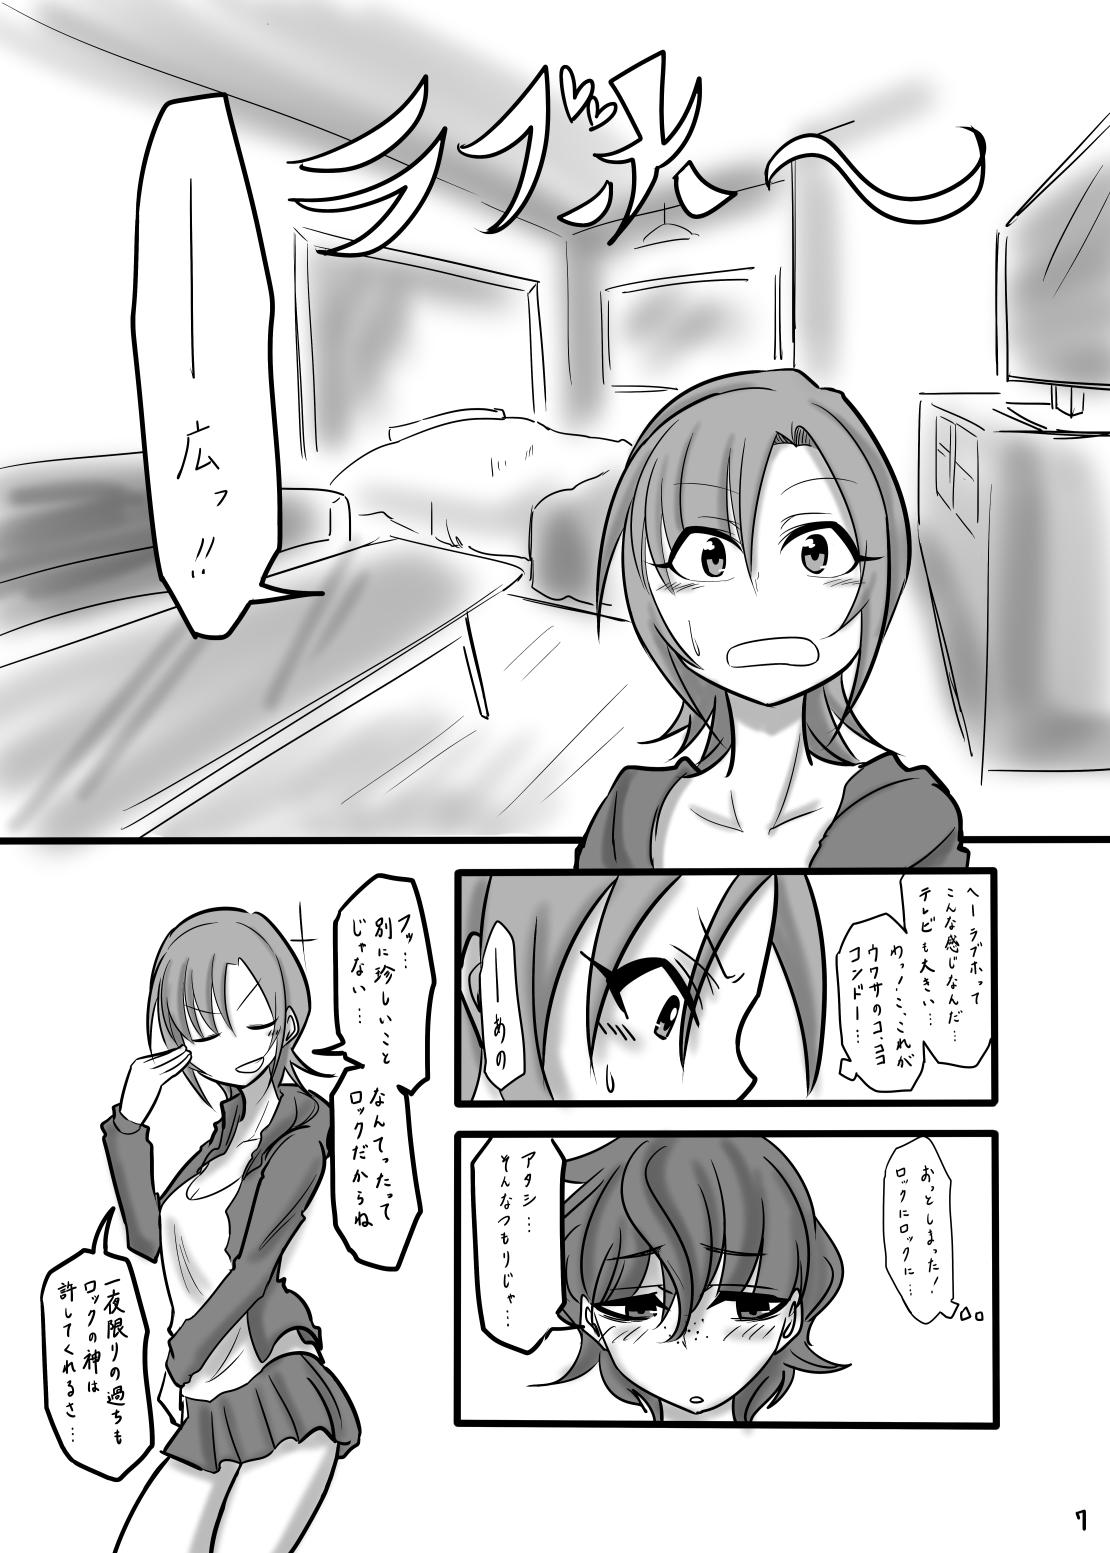 Secret TOMORROW NEVER KNOWS - The idolmaster Rough - Page 7